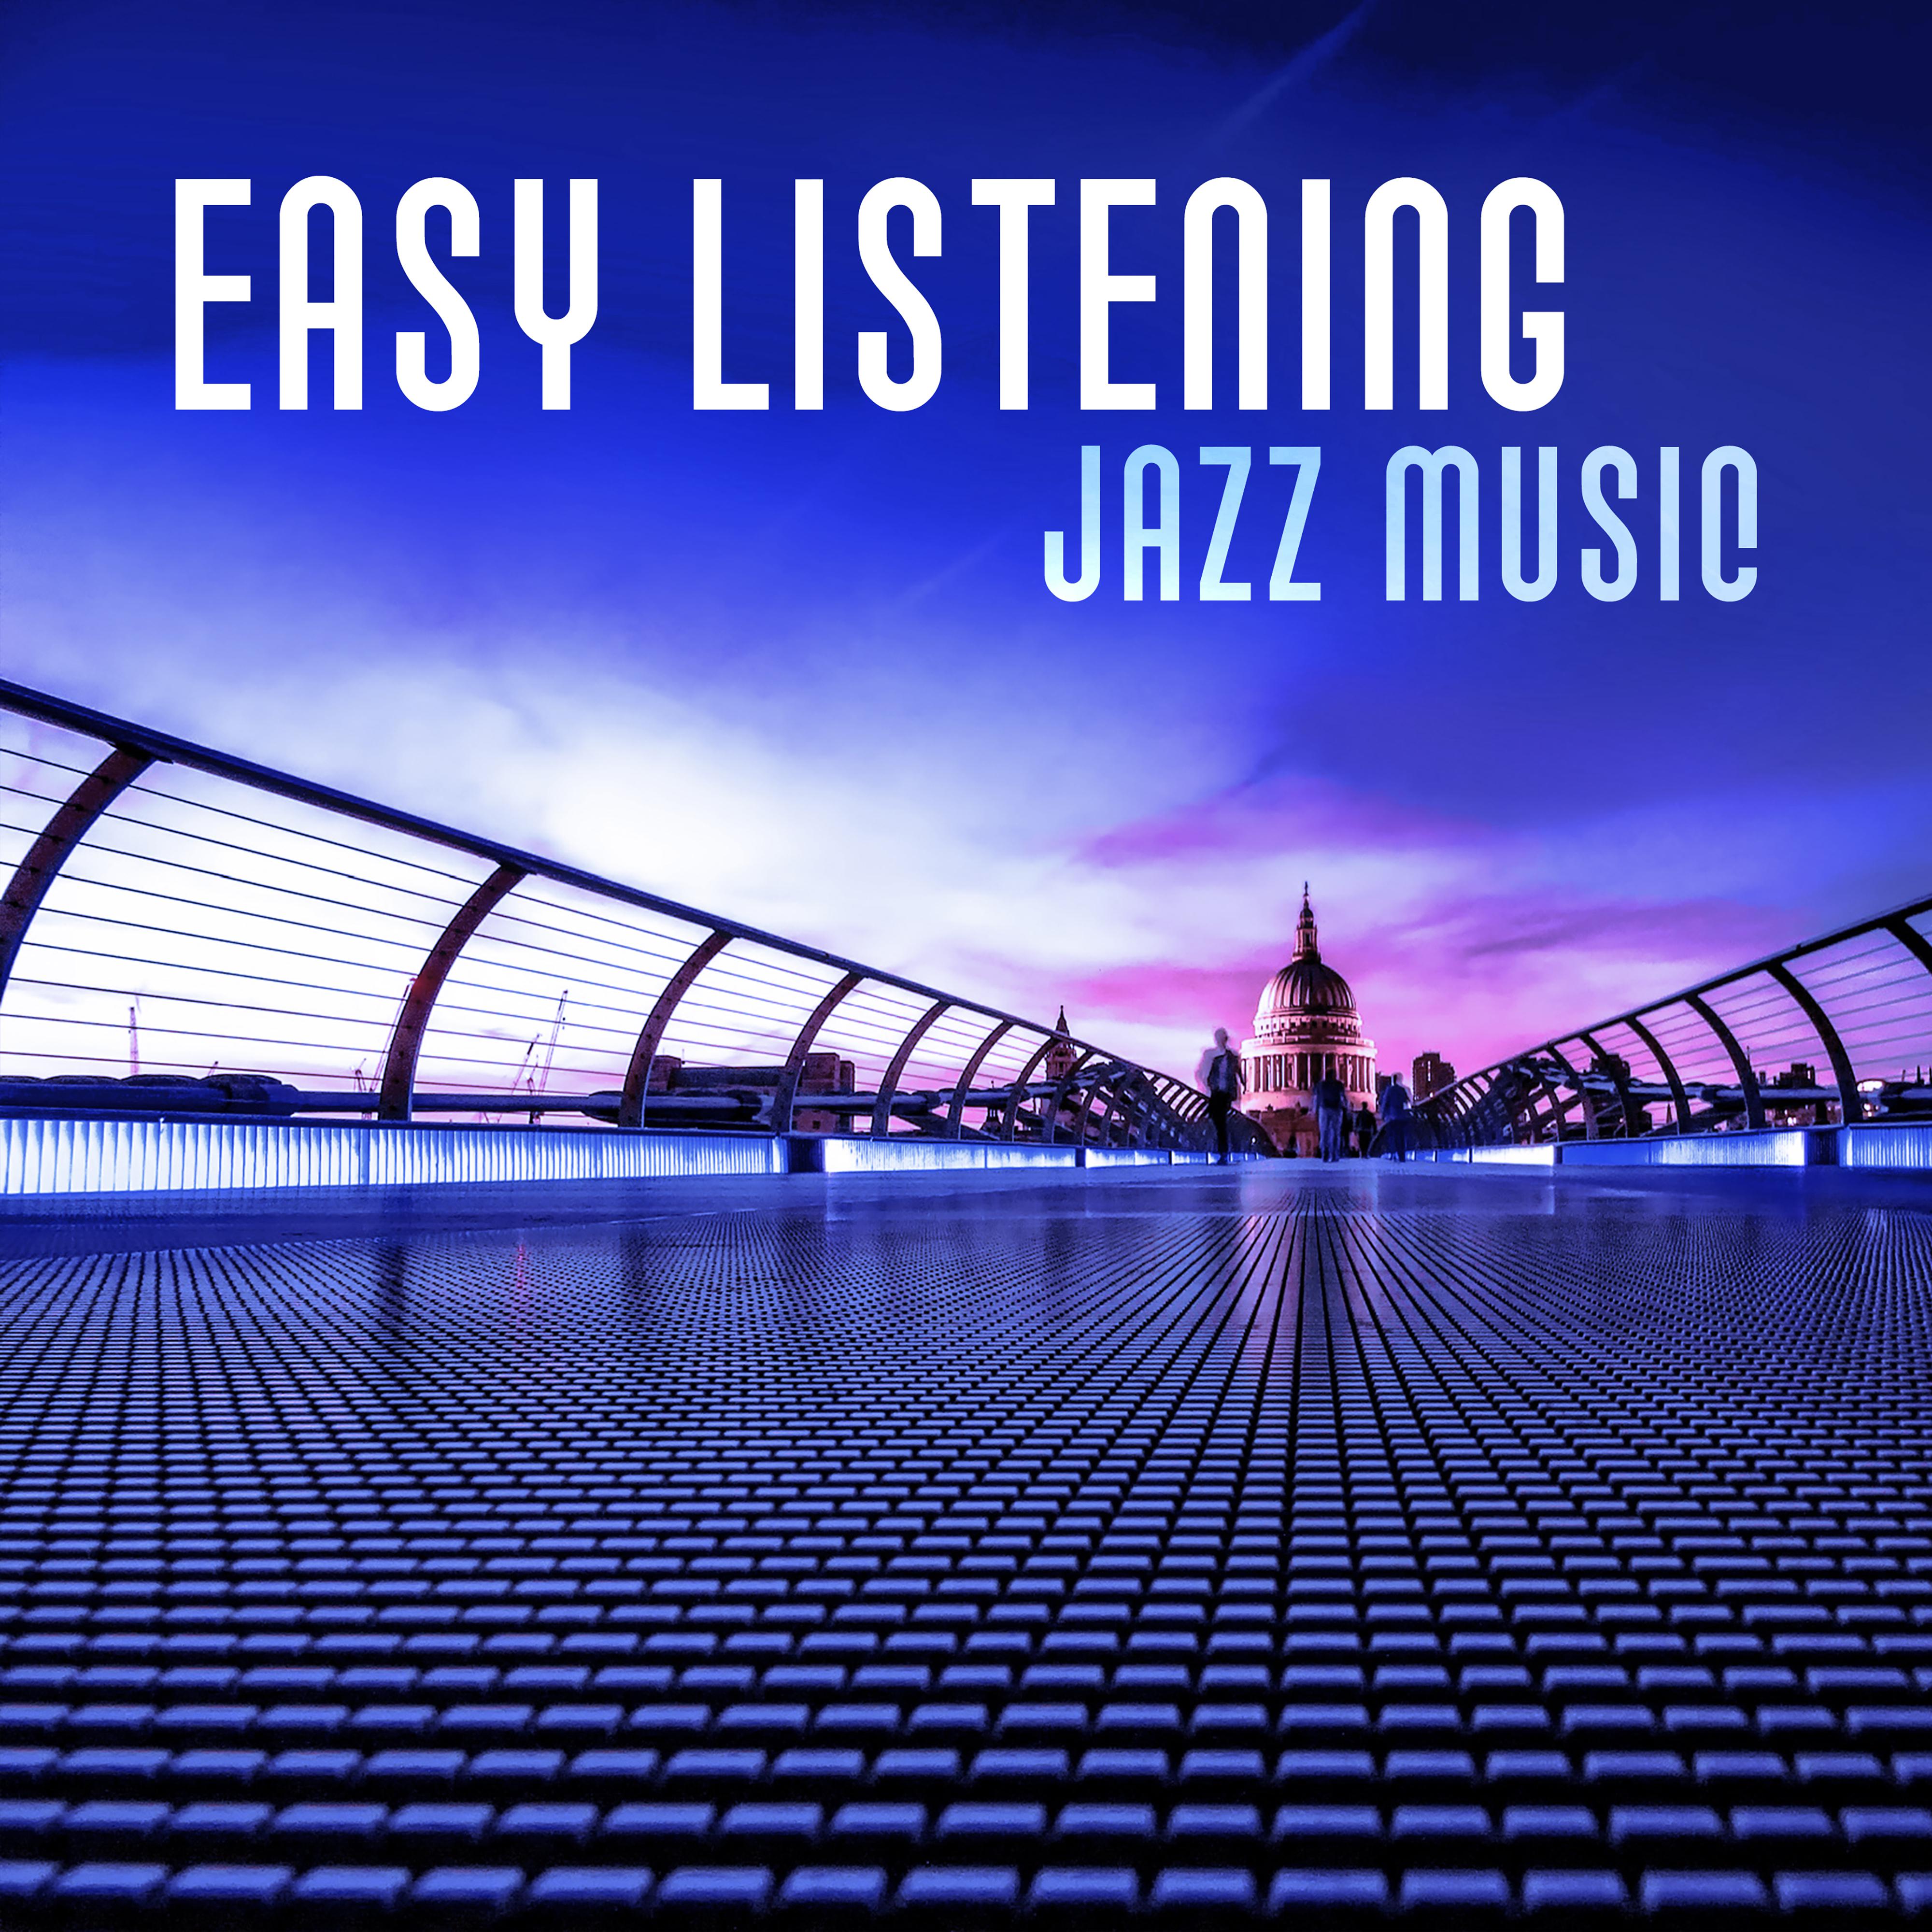 Easy Listening Jazz Music  Calm Down with Jazz Sounds, Stress Relief, Time to Relax, Mellow Sounds